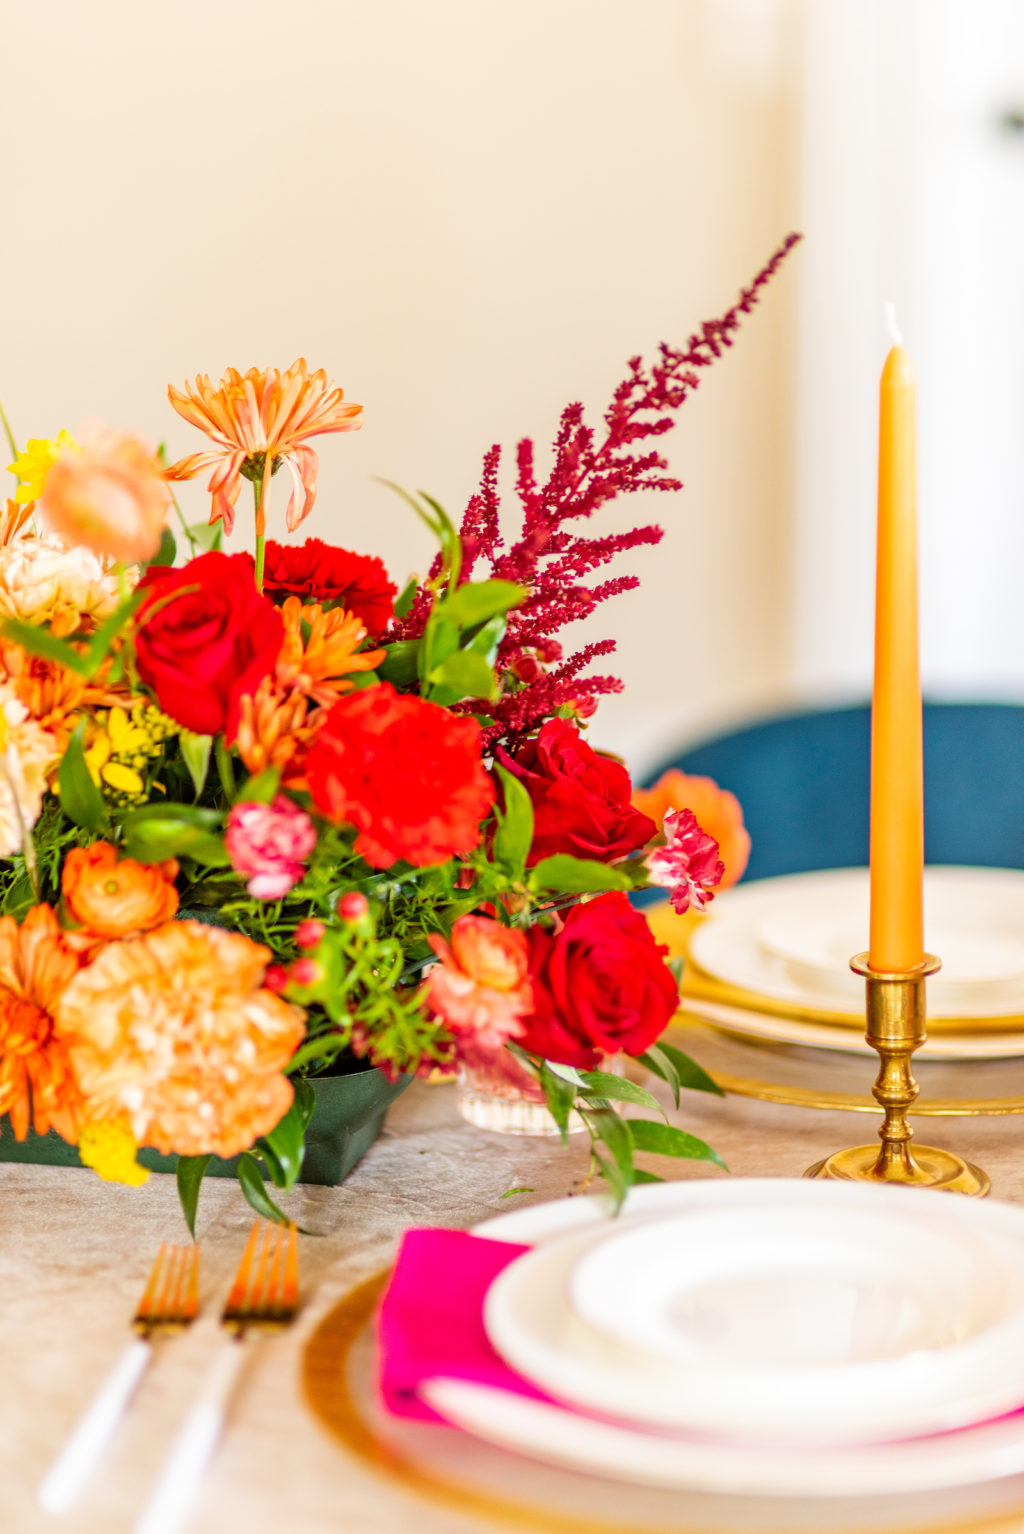 Tampa Wedding Styled Shoot 70's Retro Vintage | Colorful Vibrant Rainbow Wedding Centerpiece with Daisies, Roses, Ranunculus, Stock and Astilbe | Gold Rim Charger and China with Dipped Gold Flatware and Colorful Napkin by Kate Ryan Event Rentals